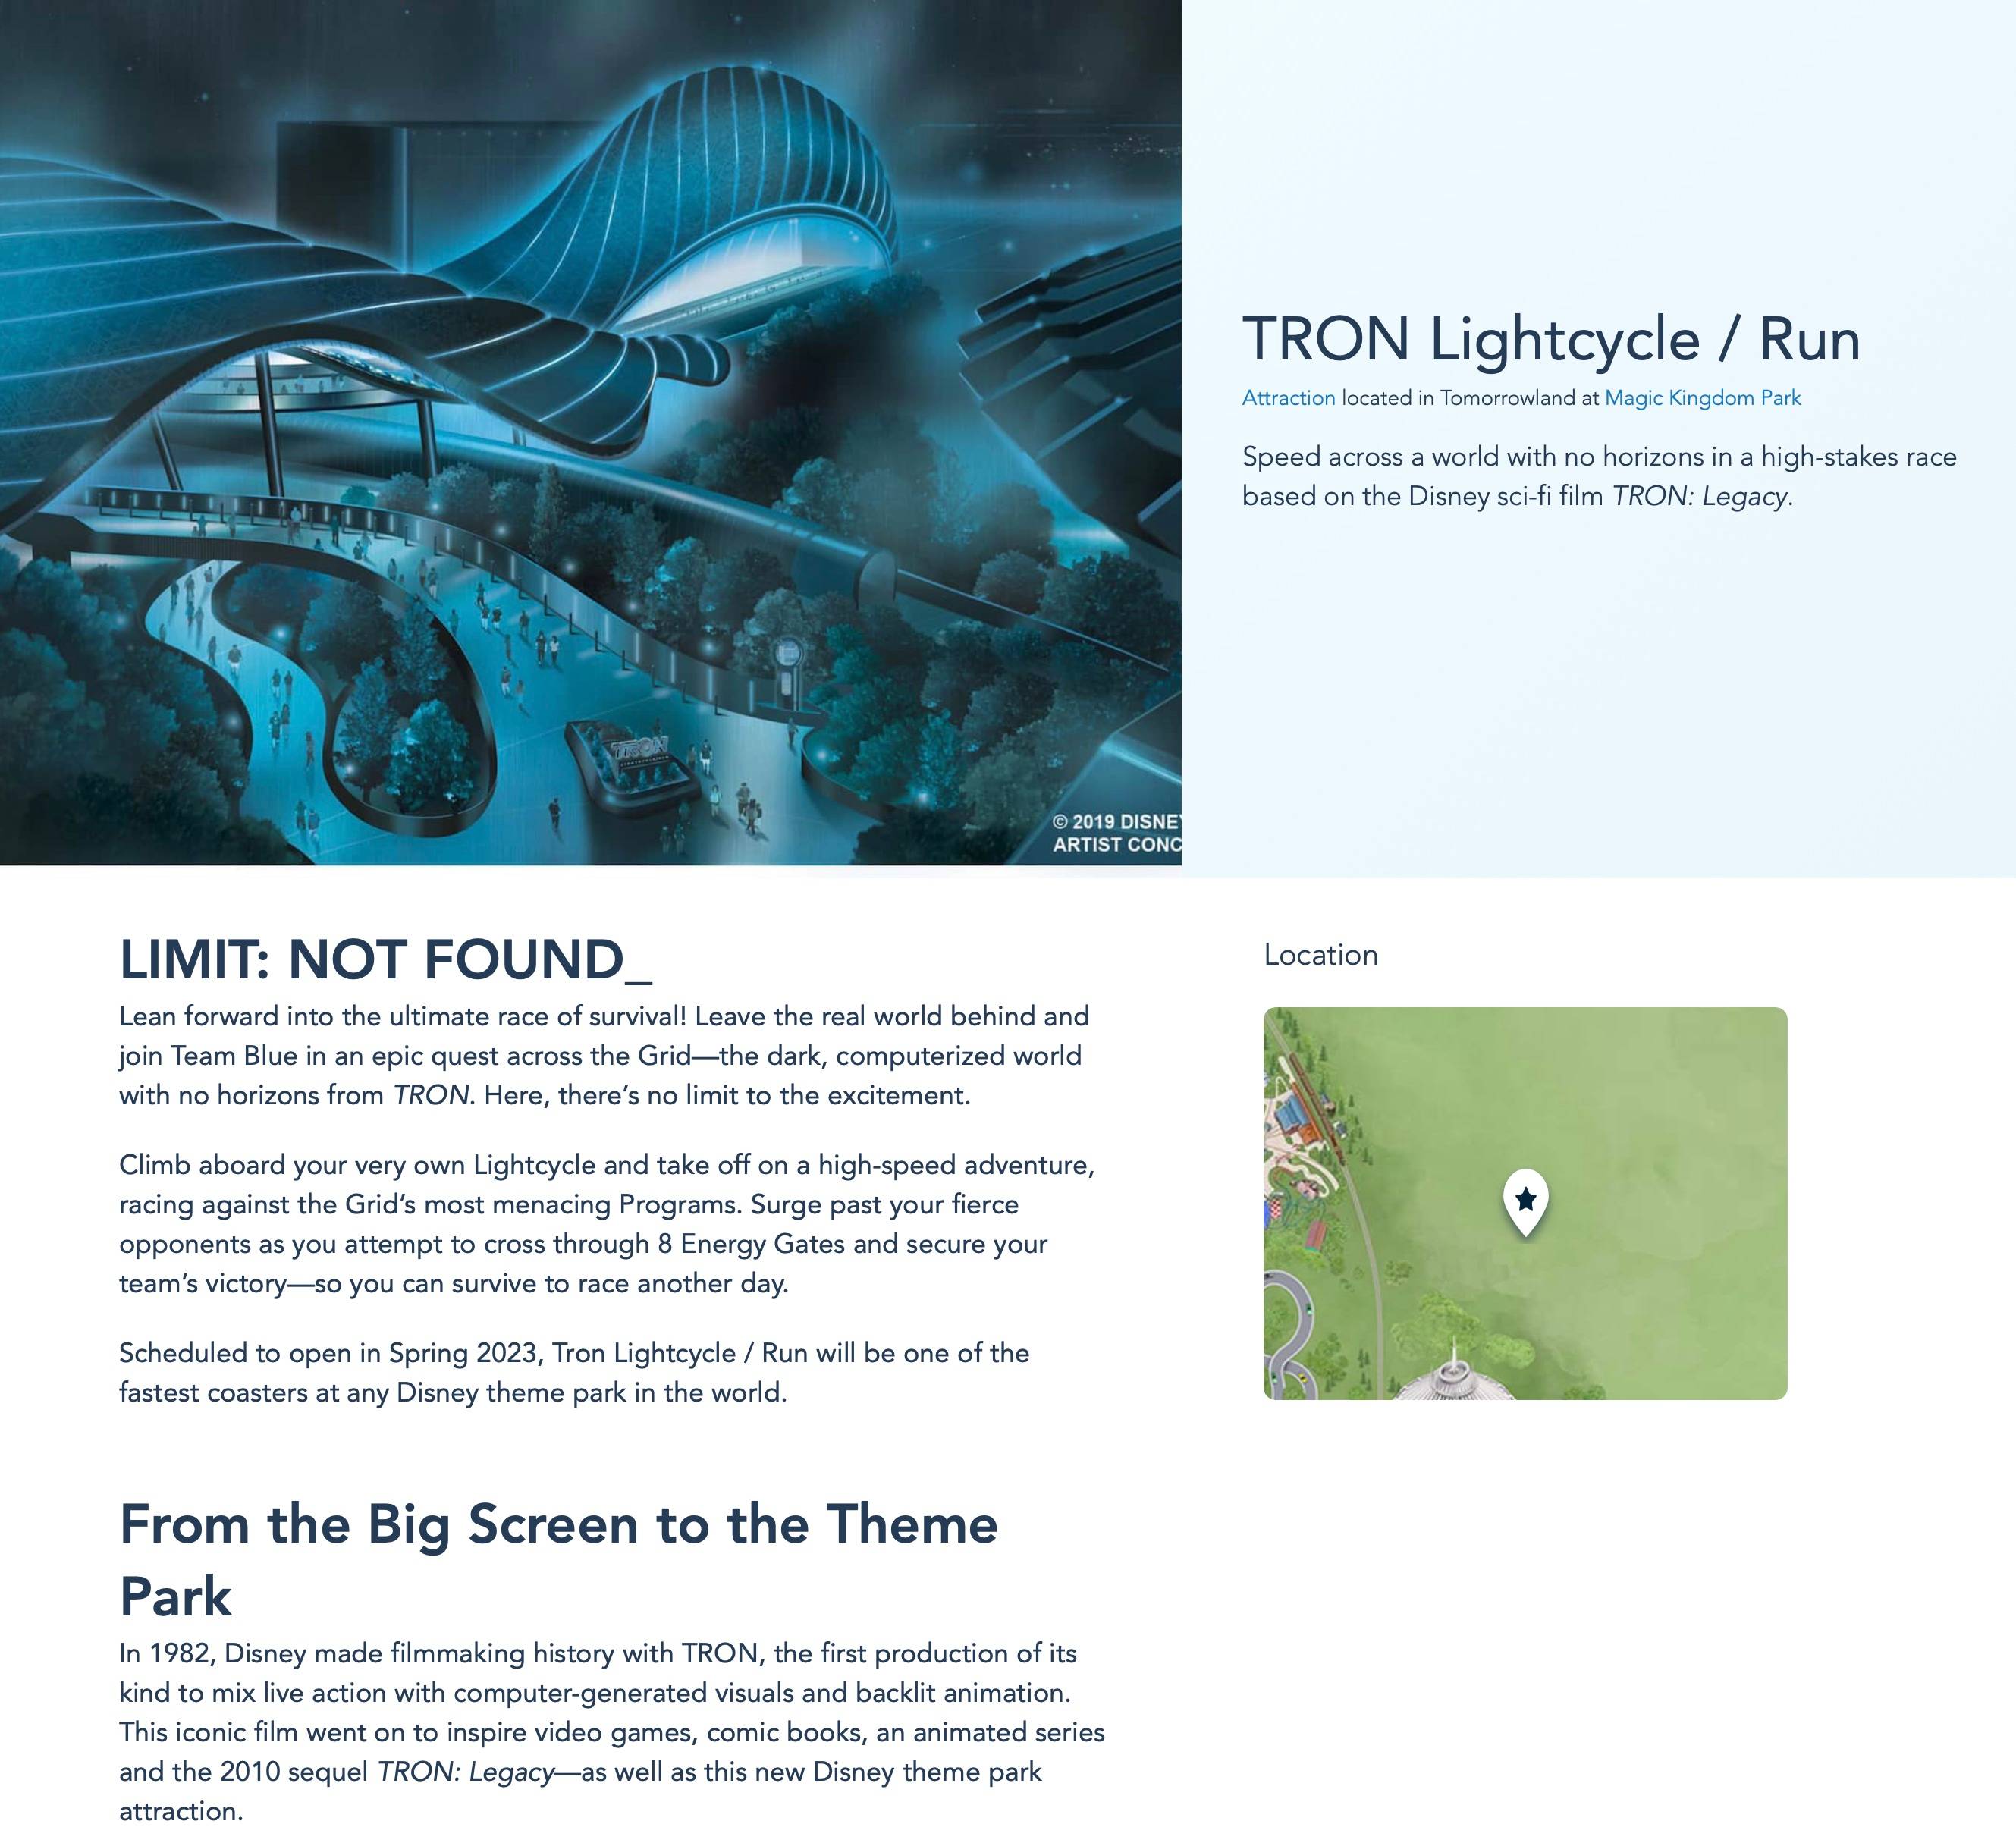 TRON Lightycle Run official Disney web page